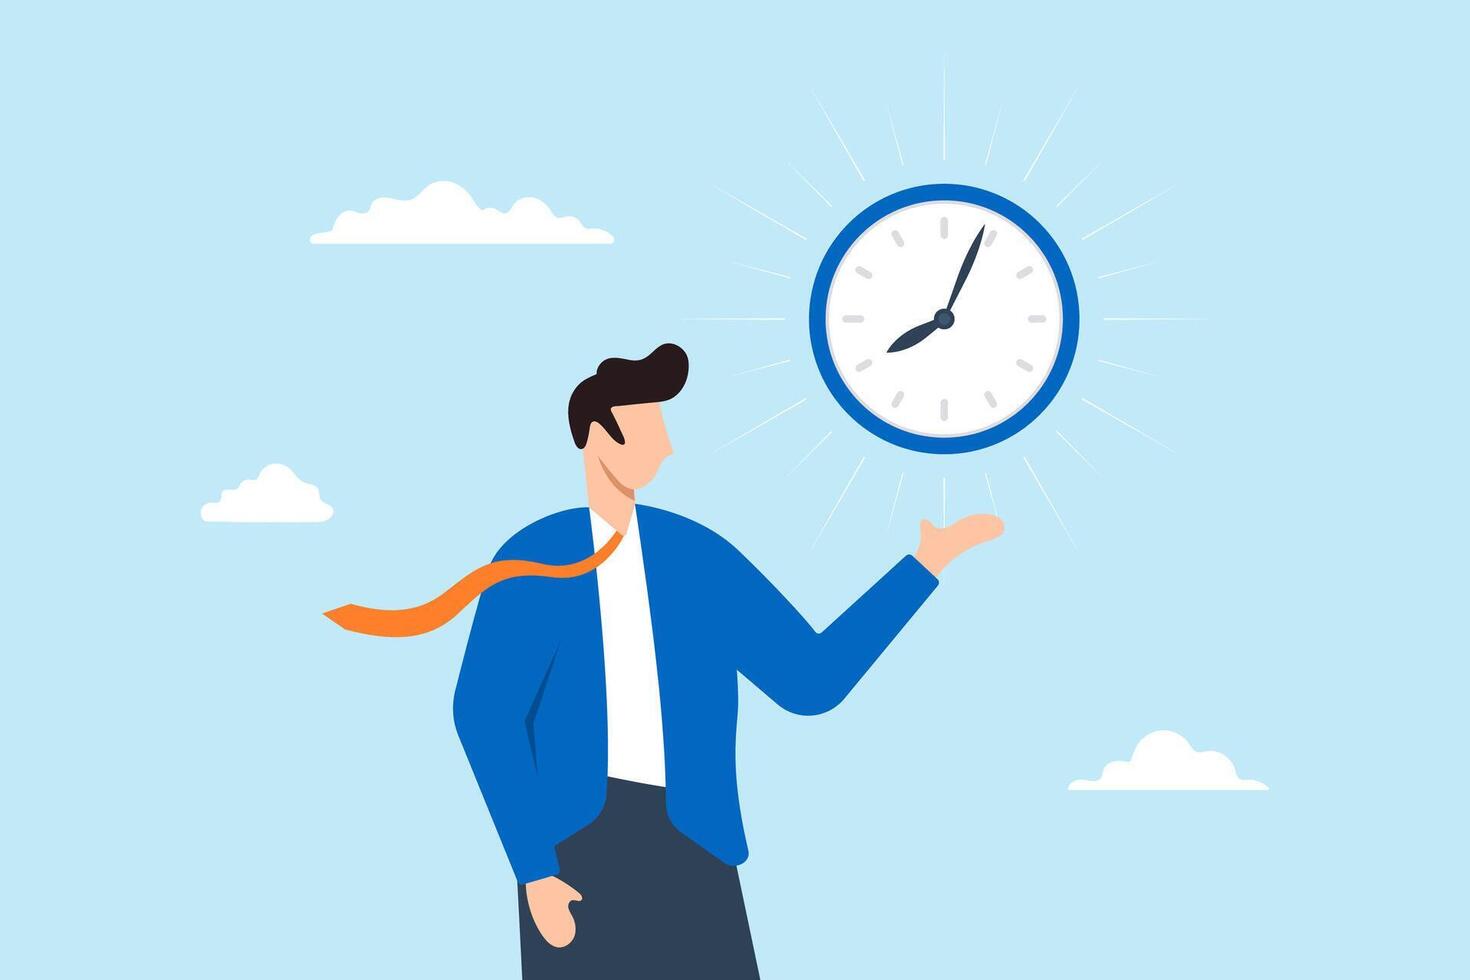 Businessman holding clock illustrating commitment to meeting reminders. Concept of punctuality, being on time for appointments or schedules, finishing work within deadlines, and time management vector